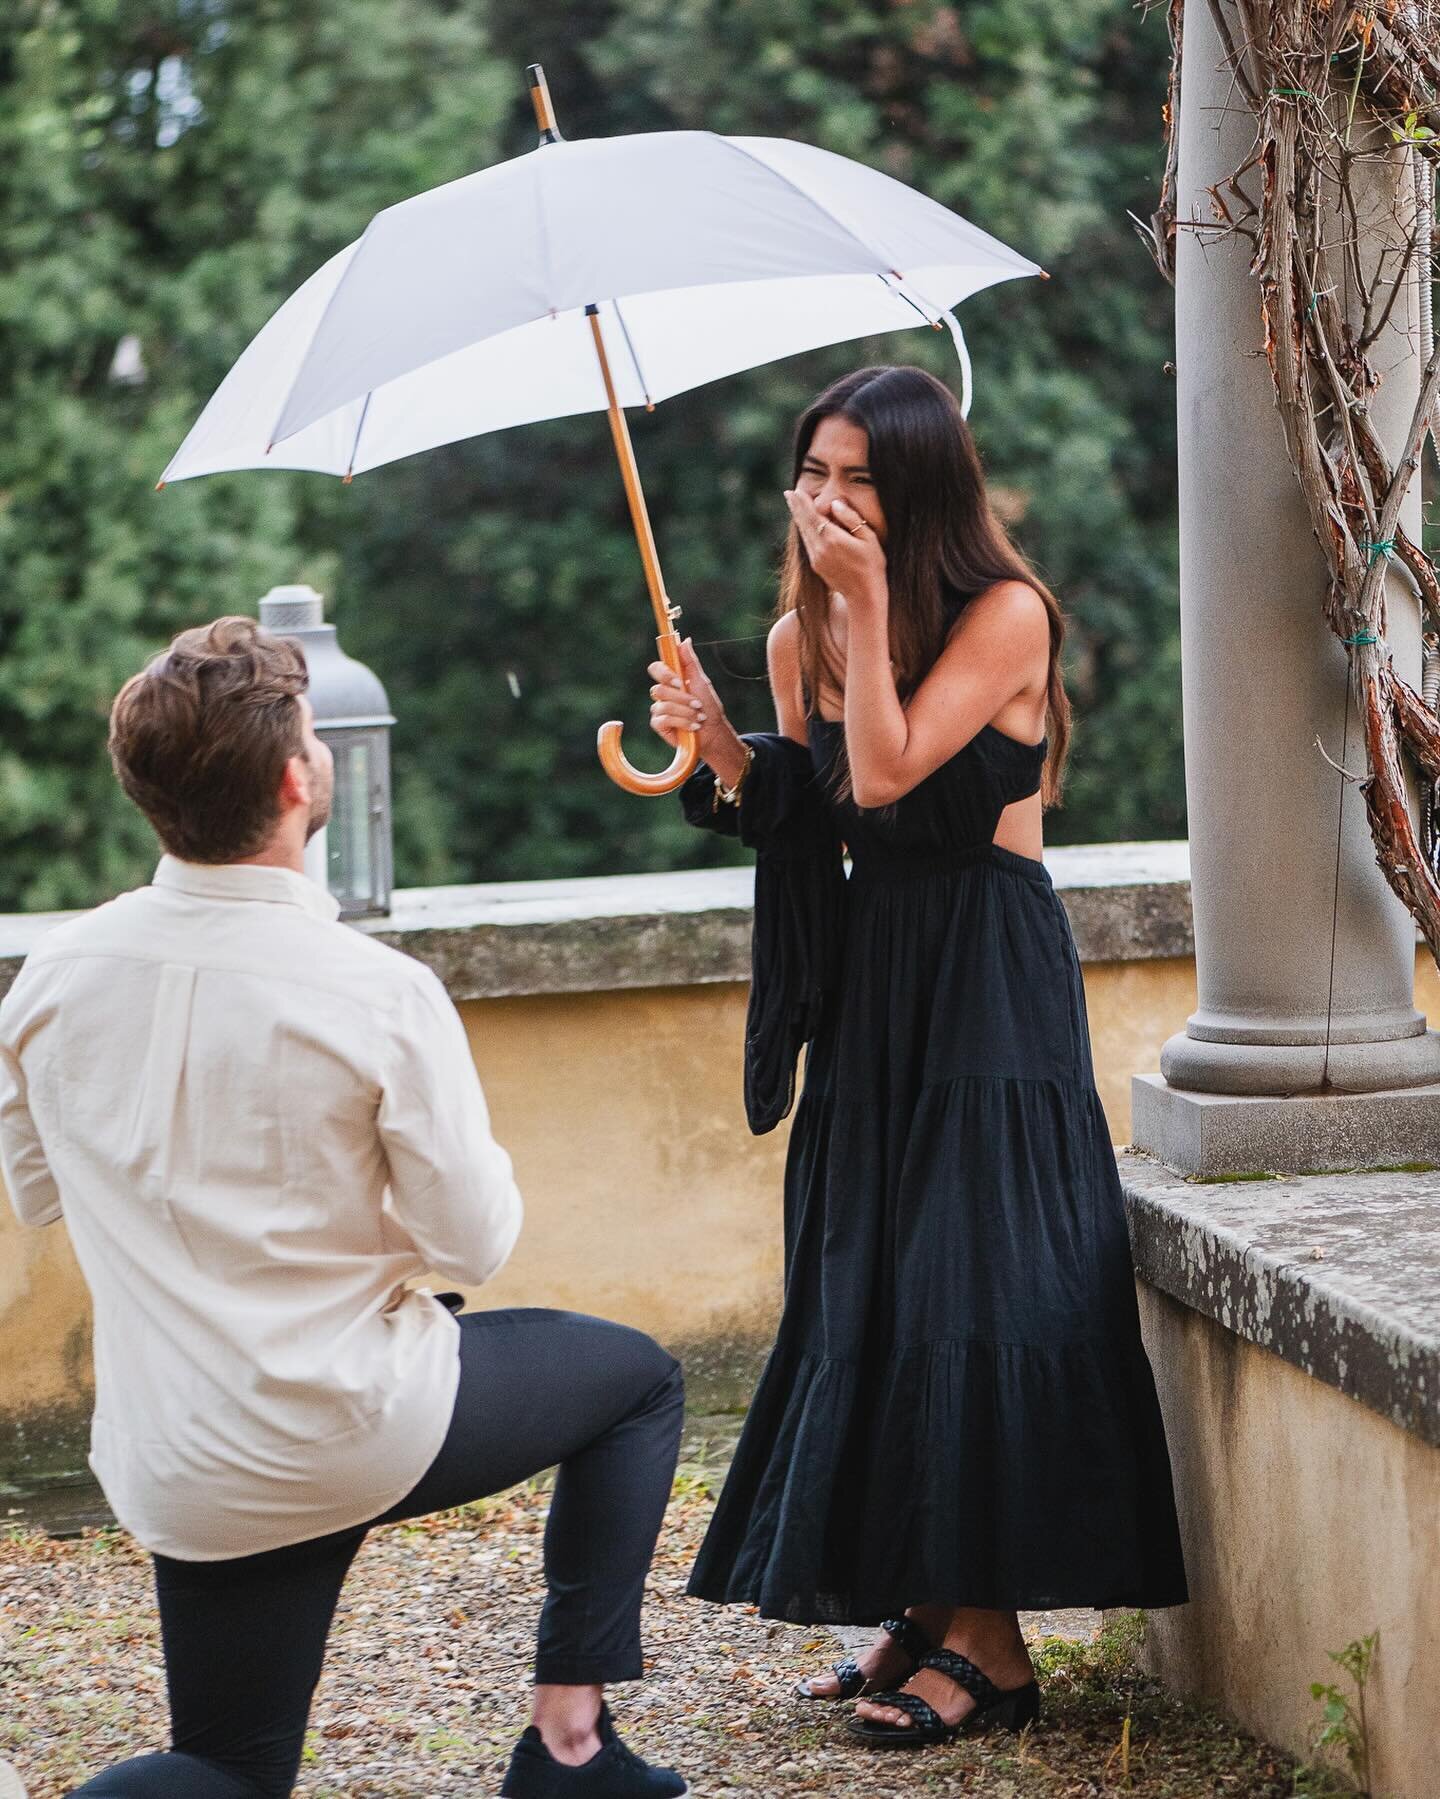 Dreamy proposal on a rainy day in Florence. Getting to capture these moments makes my heart so full. 

#engagementshoot #proposal #florenceproposal  #tuscanyproposal #proposalinflorence #proposalintuscany #florenceweddingphotographer #florence #coupl